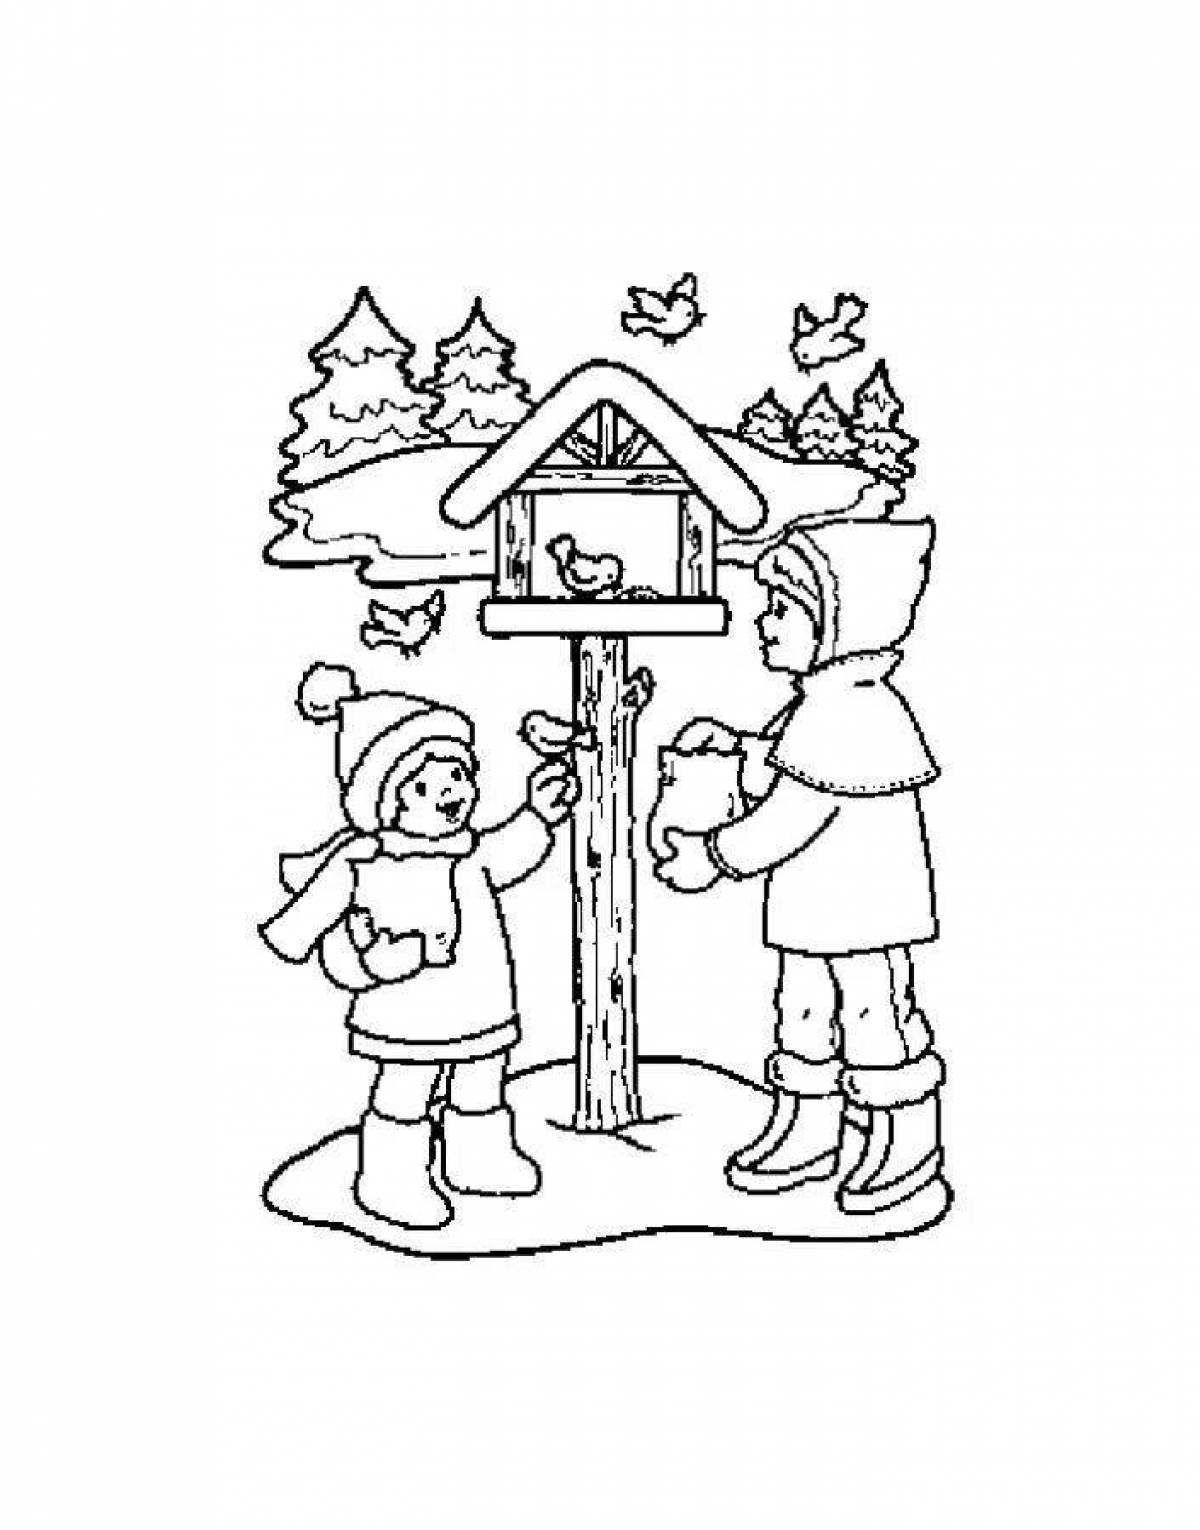 Radiant coloring page of winter work